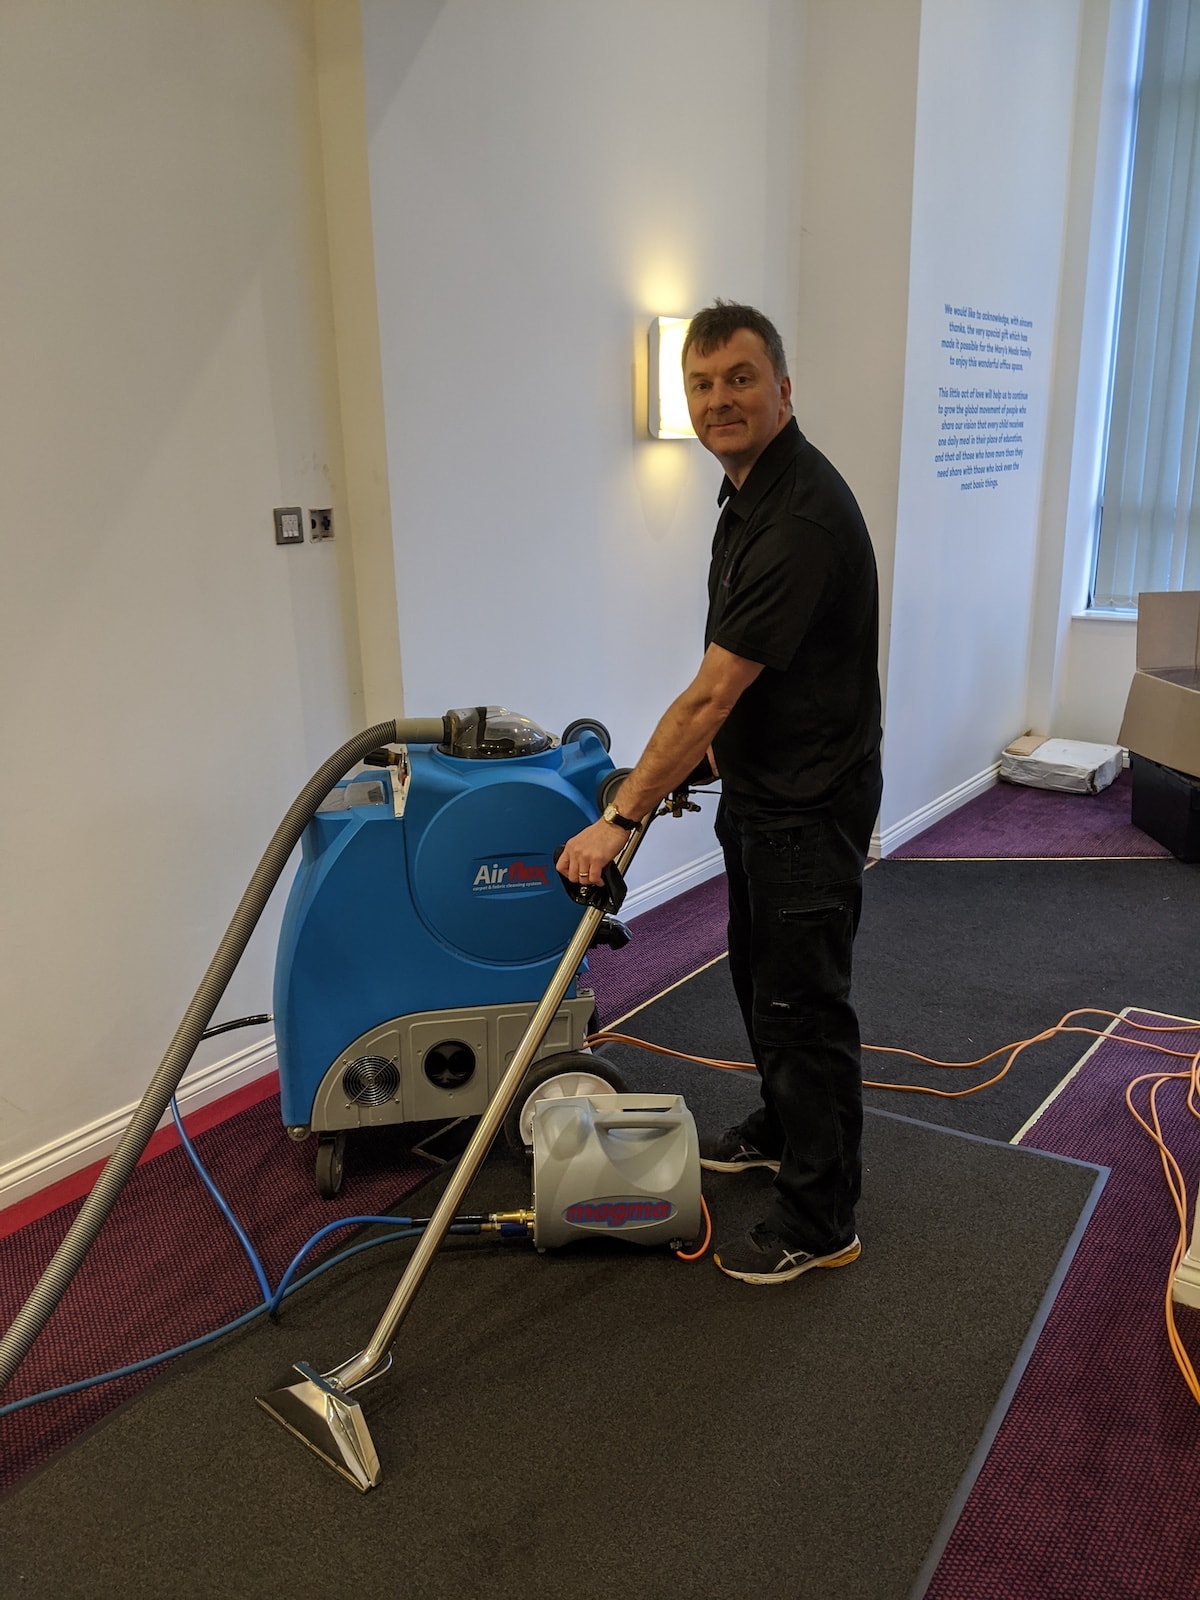 We Clean Offices Team with Commercial carpet cleaning equipment